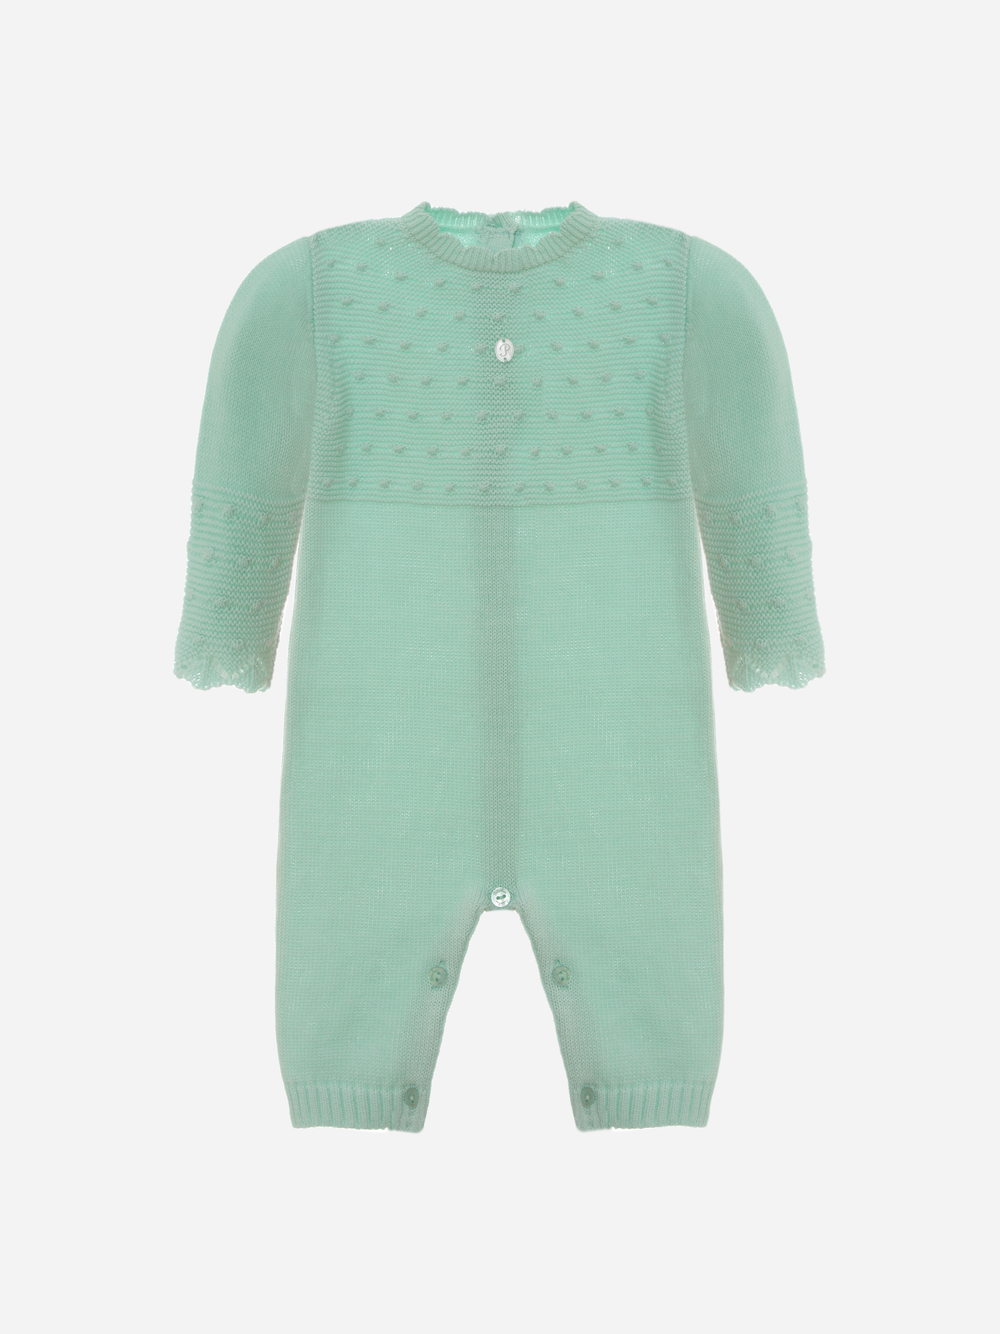 Green Water knit babygrow for unisex